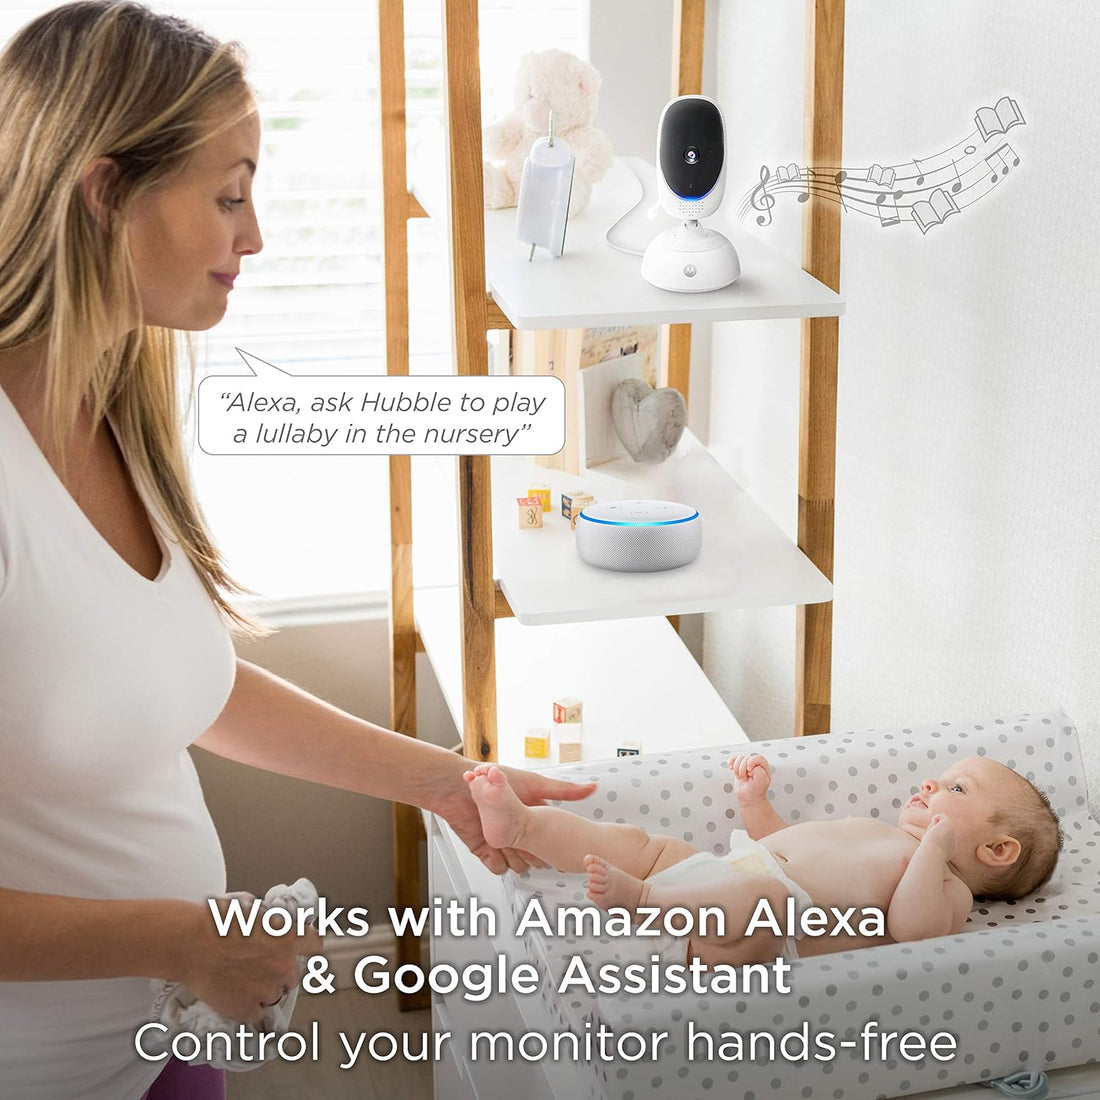 Motorola Connect40 Video Baby Monitor - 5" Parent Unit and HD Wi-Fi Viewing for Baby, Elderly, Pet - 2-Way Audio, Night Vision, Temp Sensor, Remote Pan/Digital Zoom